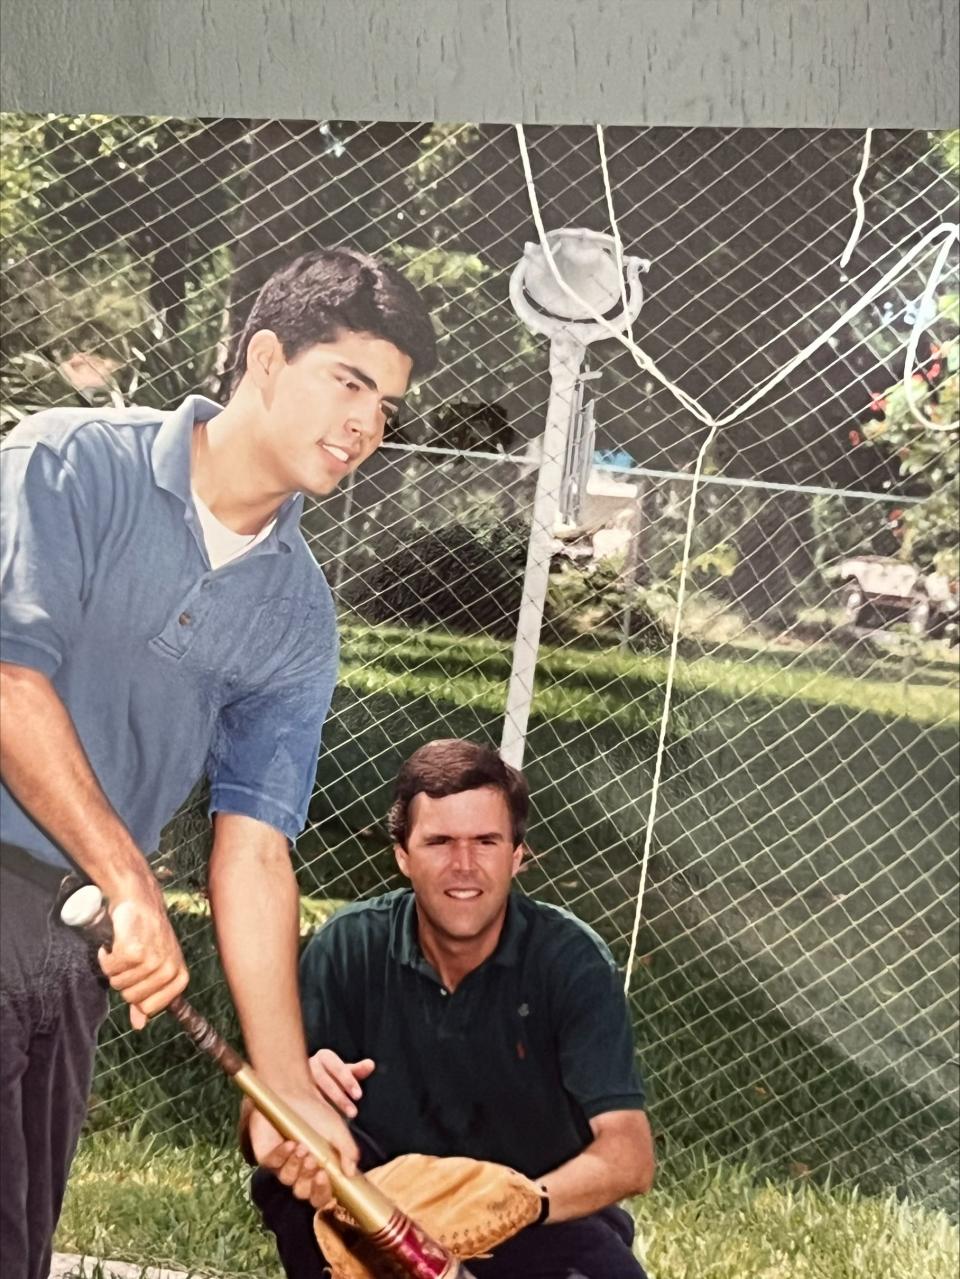 George P. Bush’s father, former Florida Governor Jeb Bush, and grandfather were behind him hitting left-handed and right-handed.